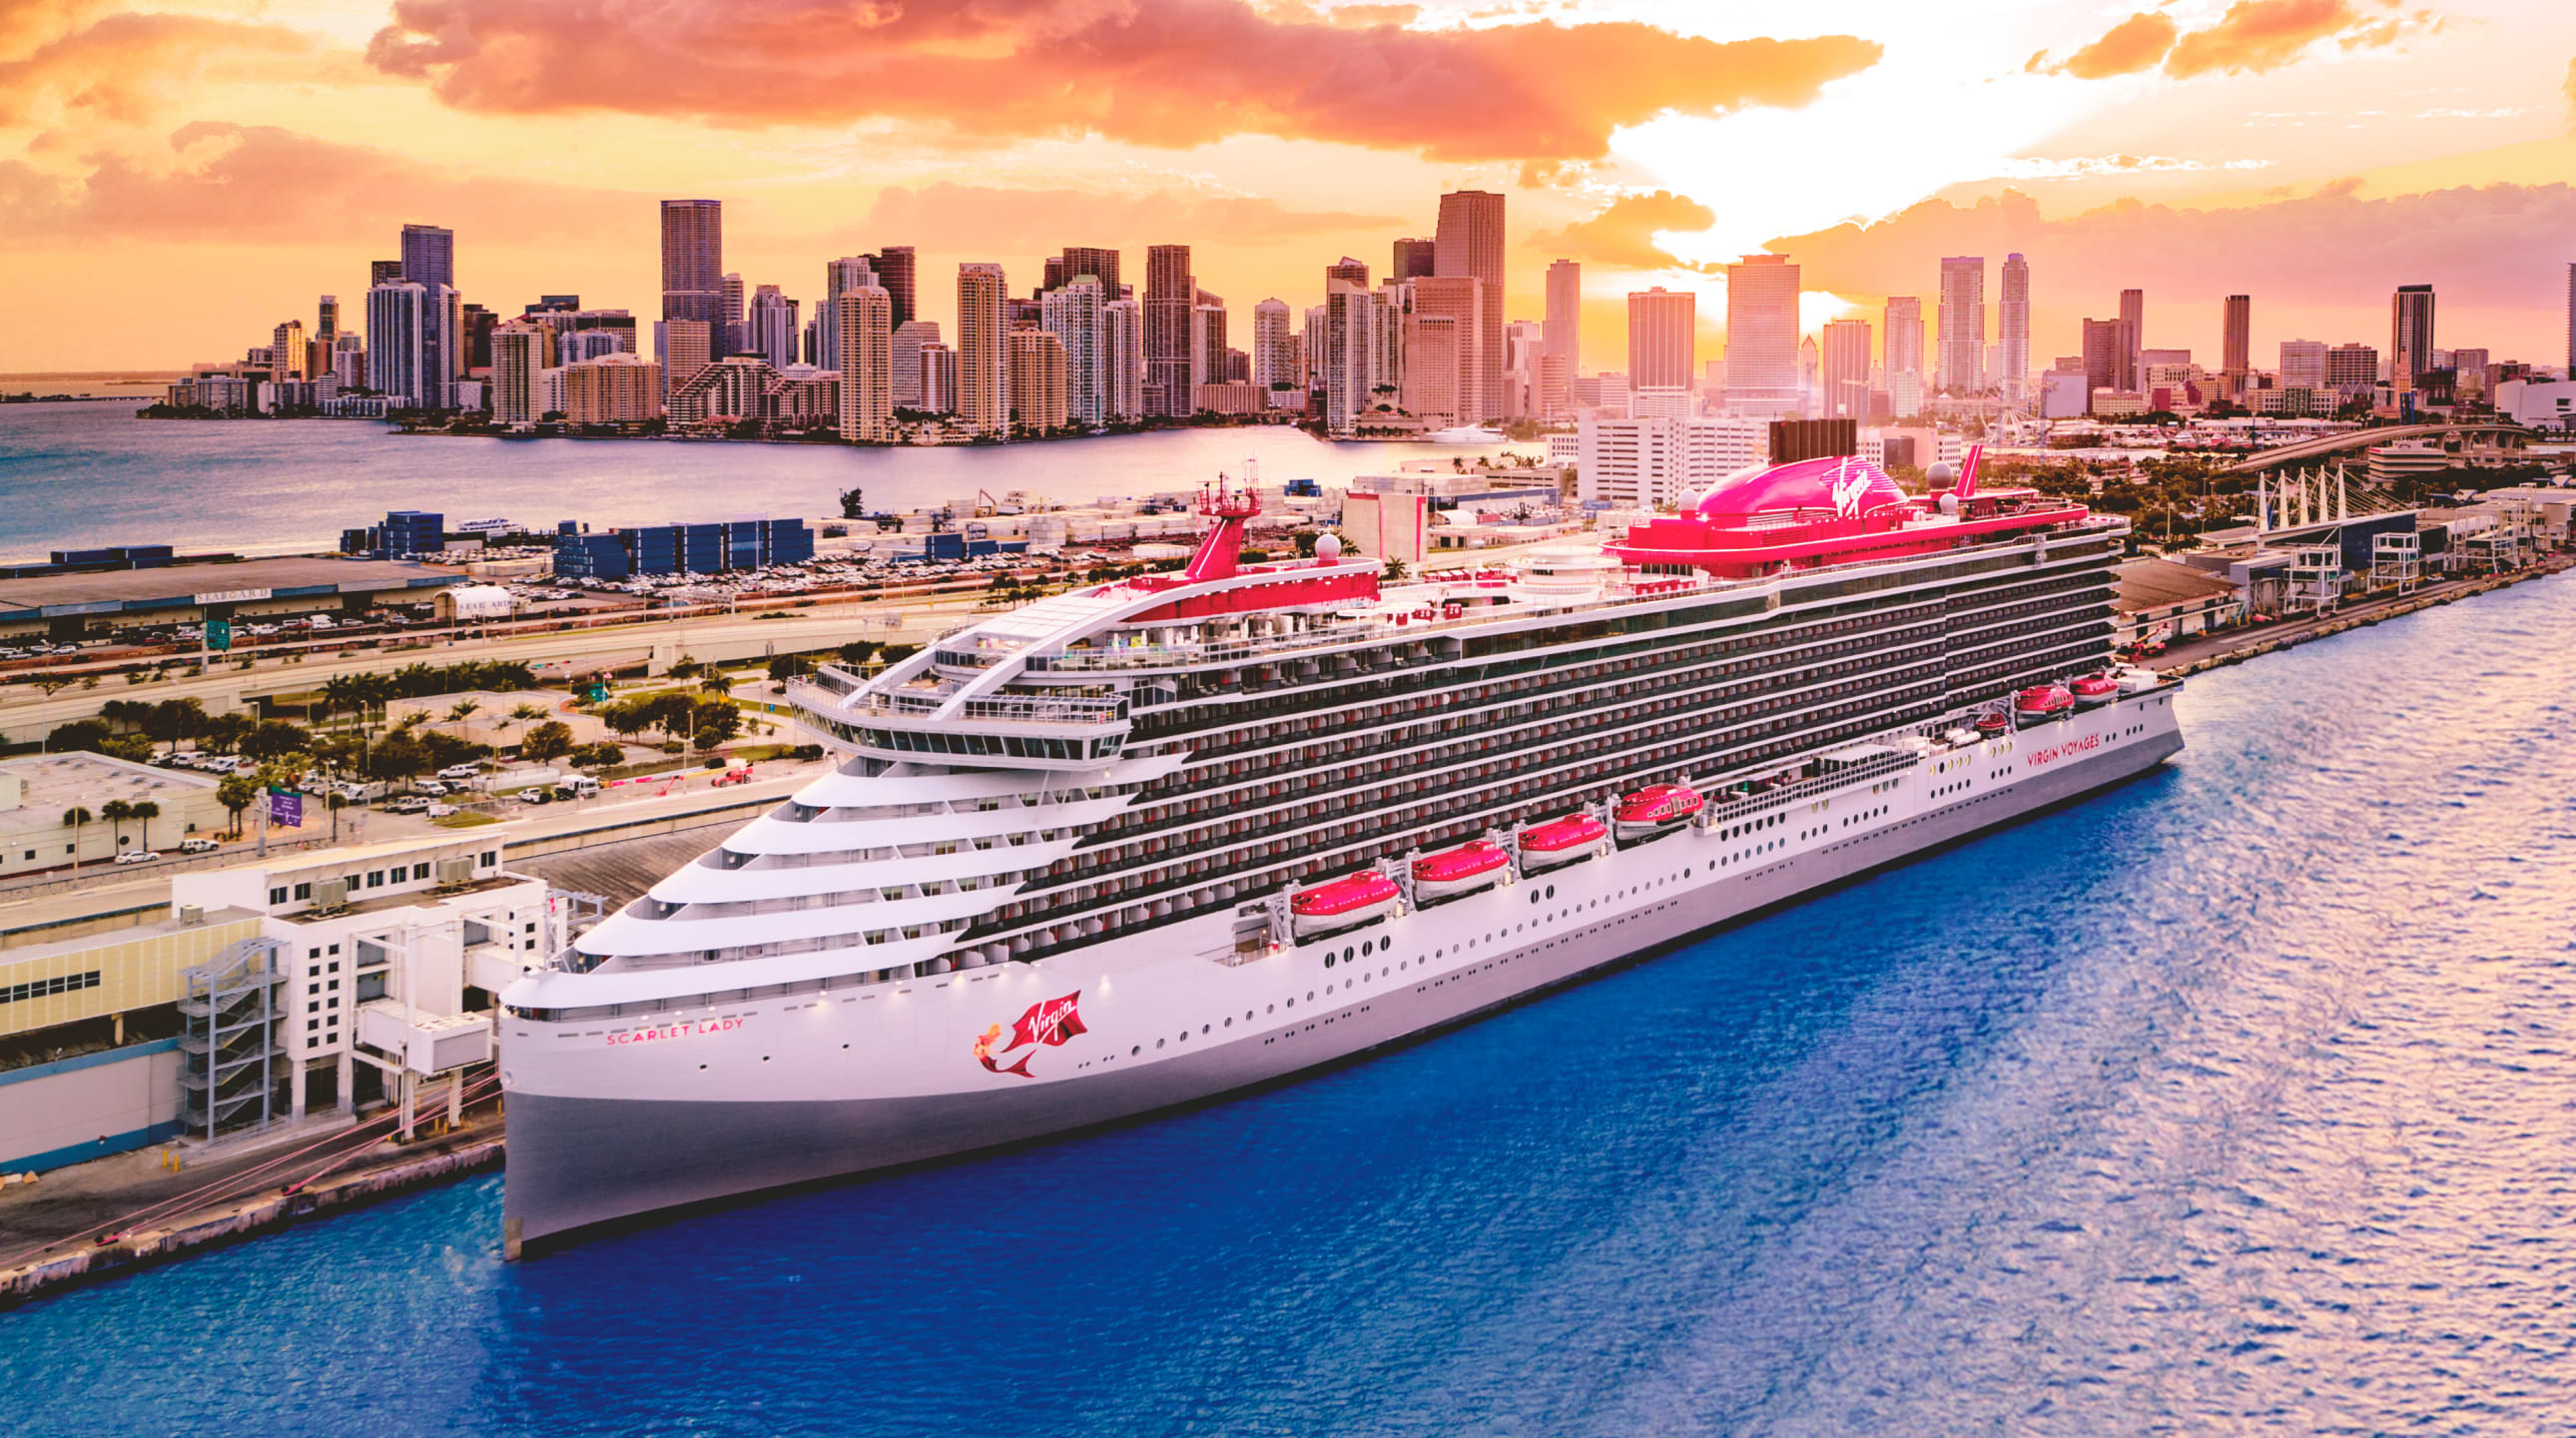 Virgin Voyages in the port of Miami